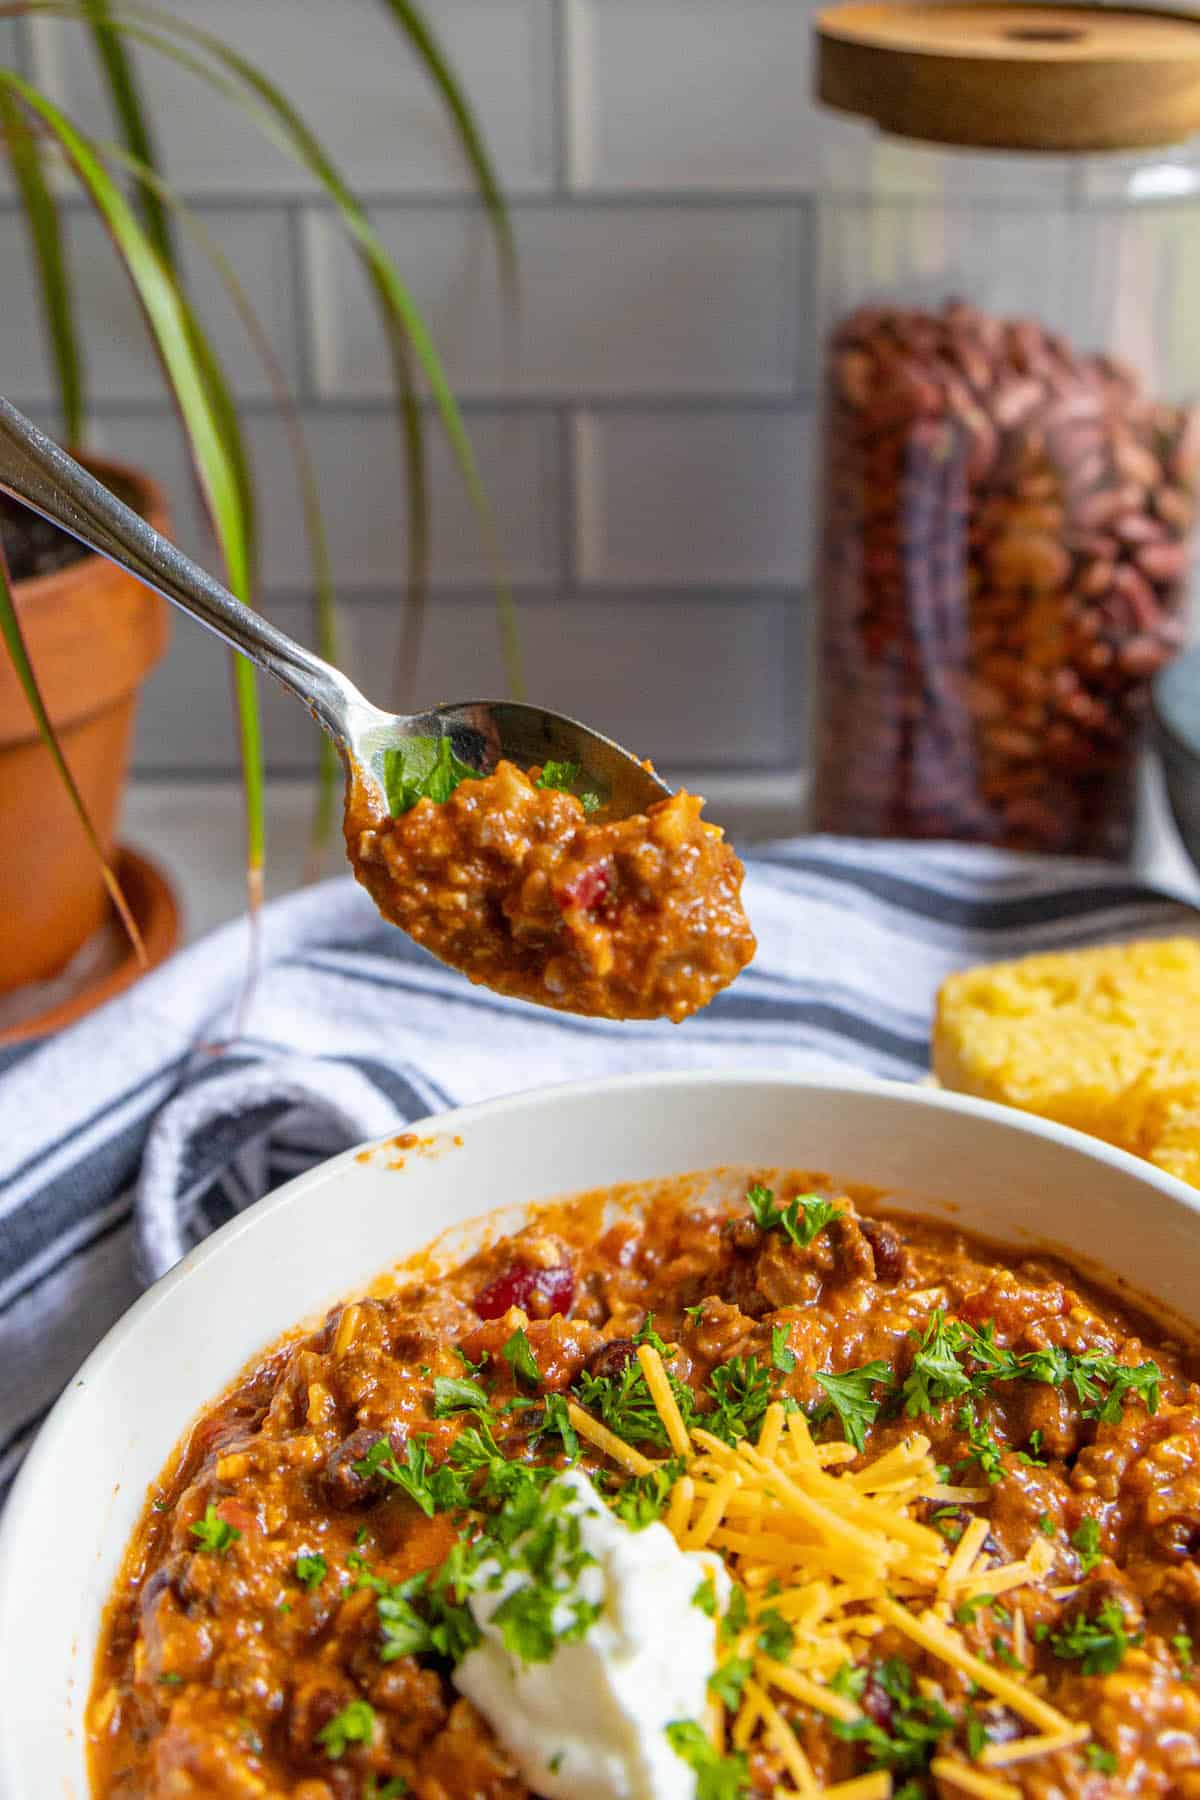 A bowl of chili with a spoon in it.